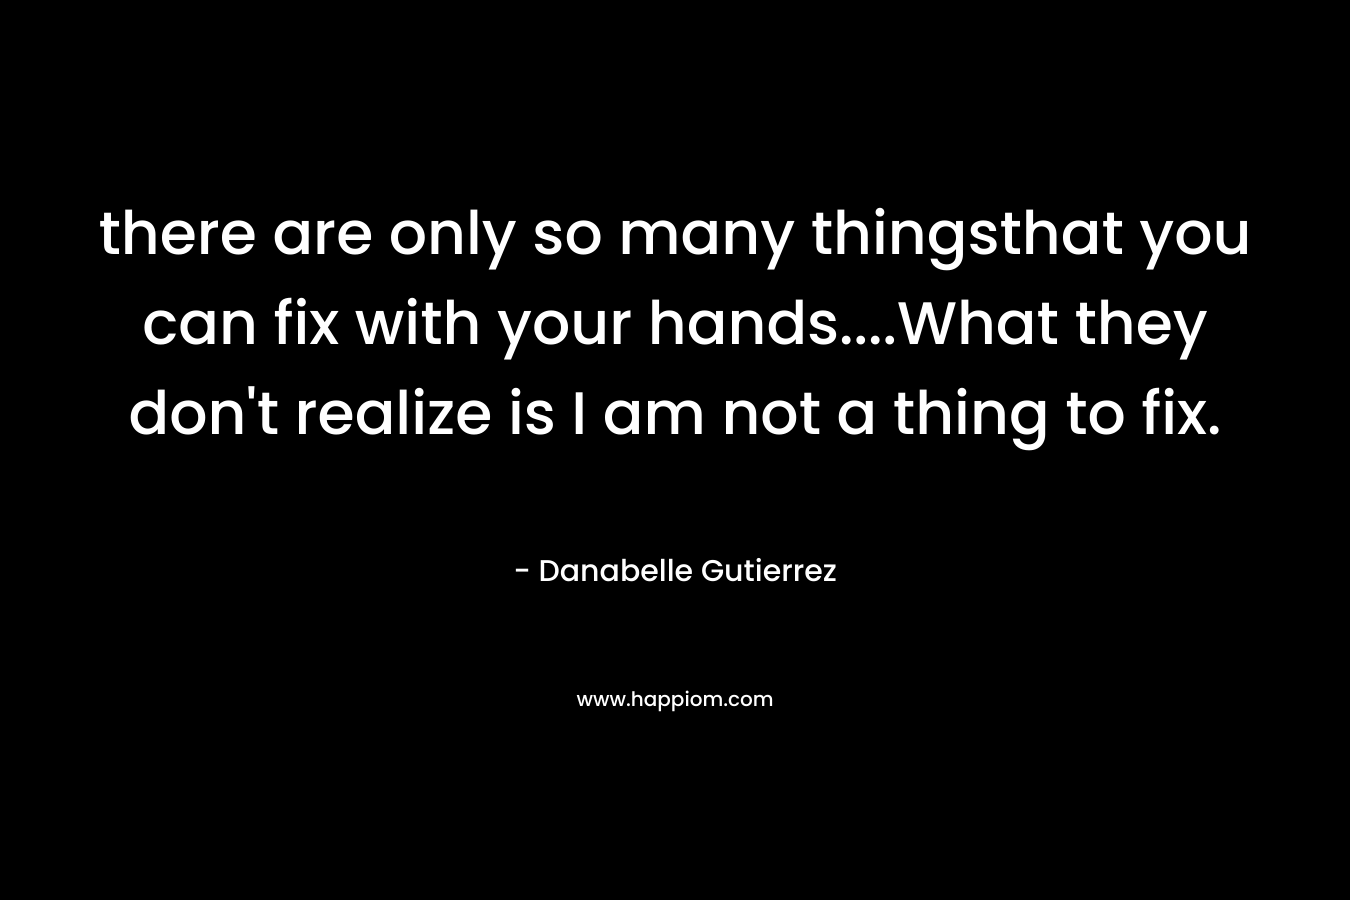 there are only so many thingsthat you can fix with your hands….What they don’t realize is I am not a thing to fix. – Danabelle Gutierrez